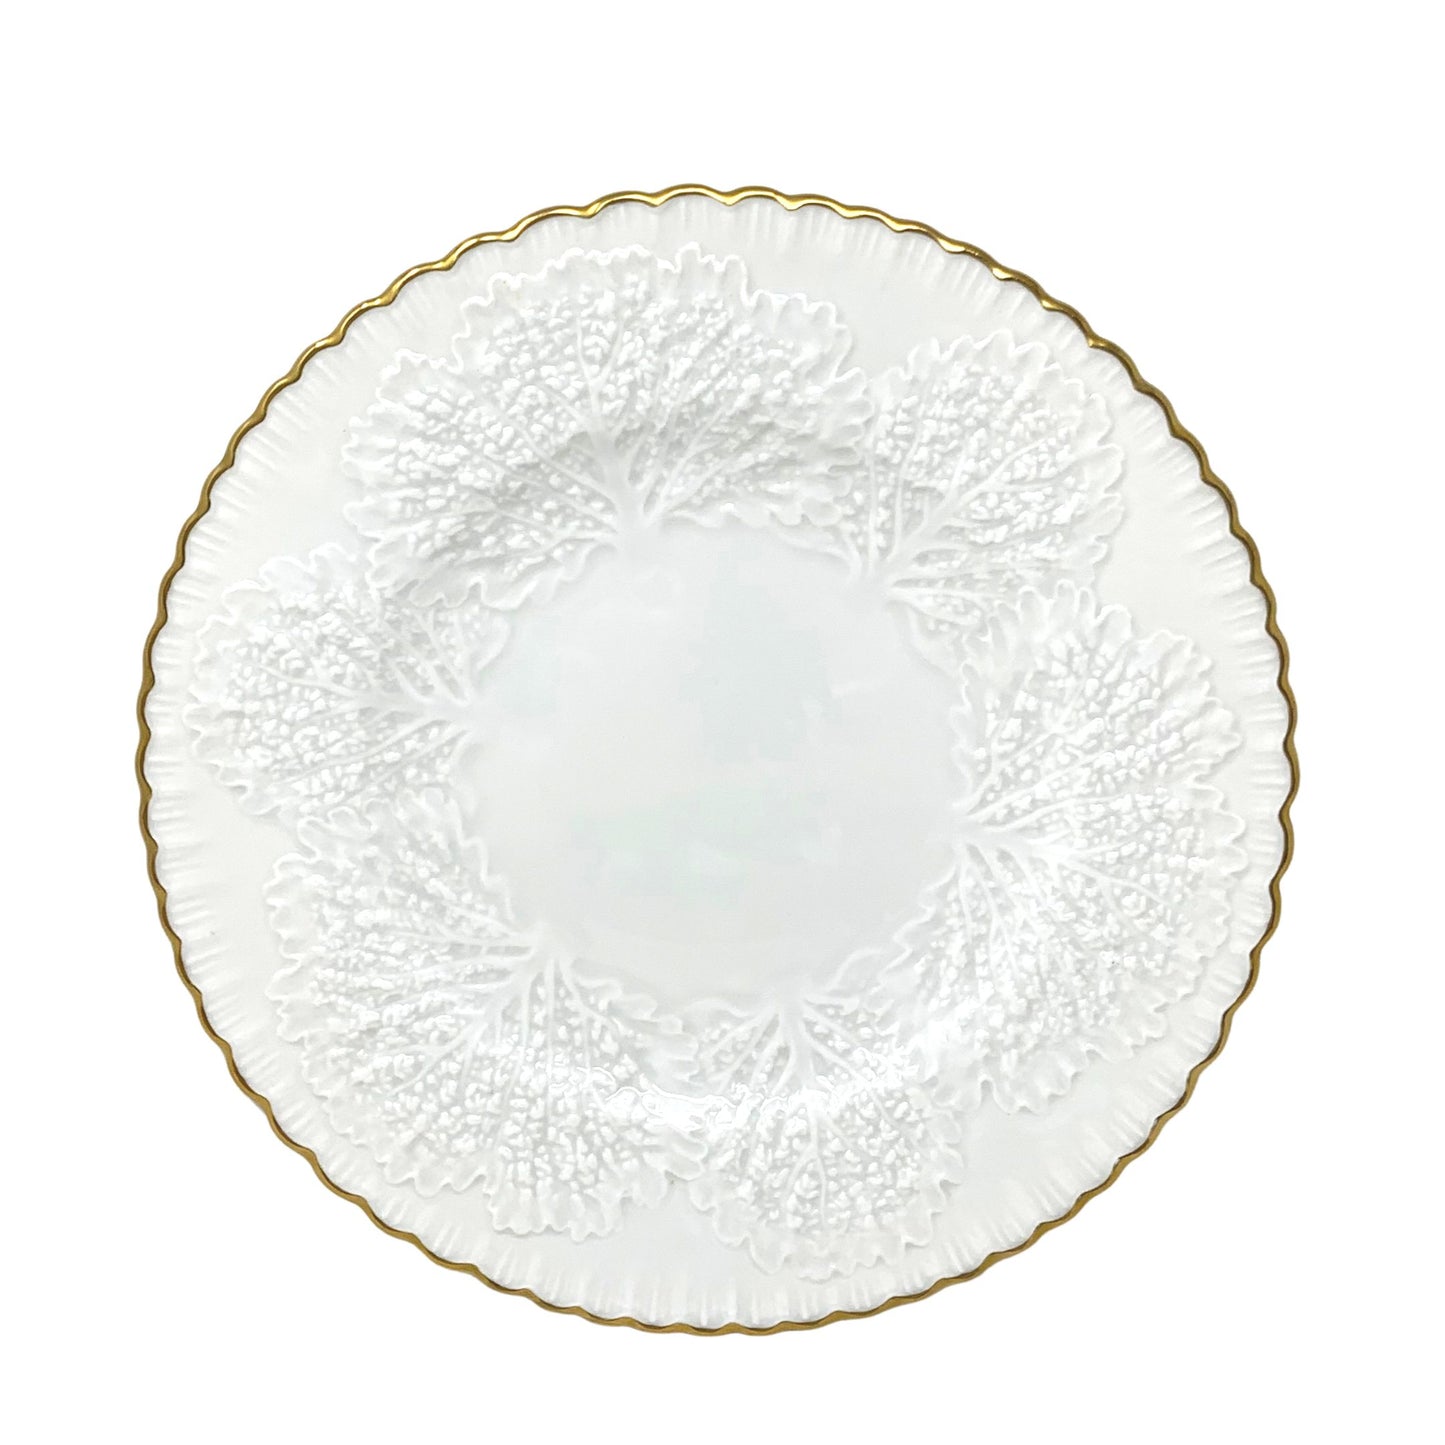 Spode "Savoy" White Dinner Plate With Gold Trim